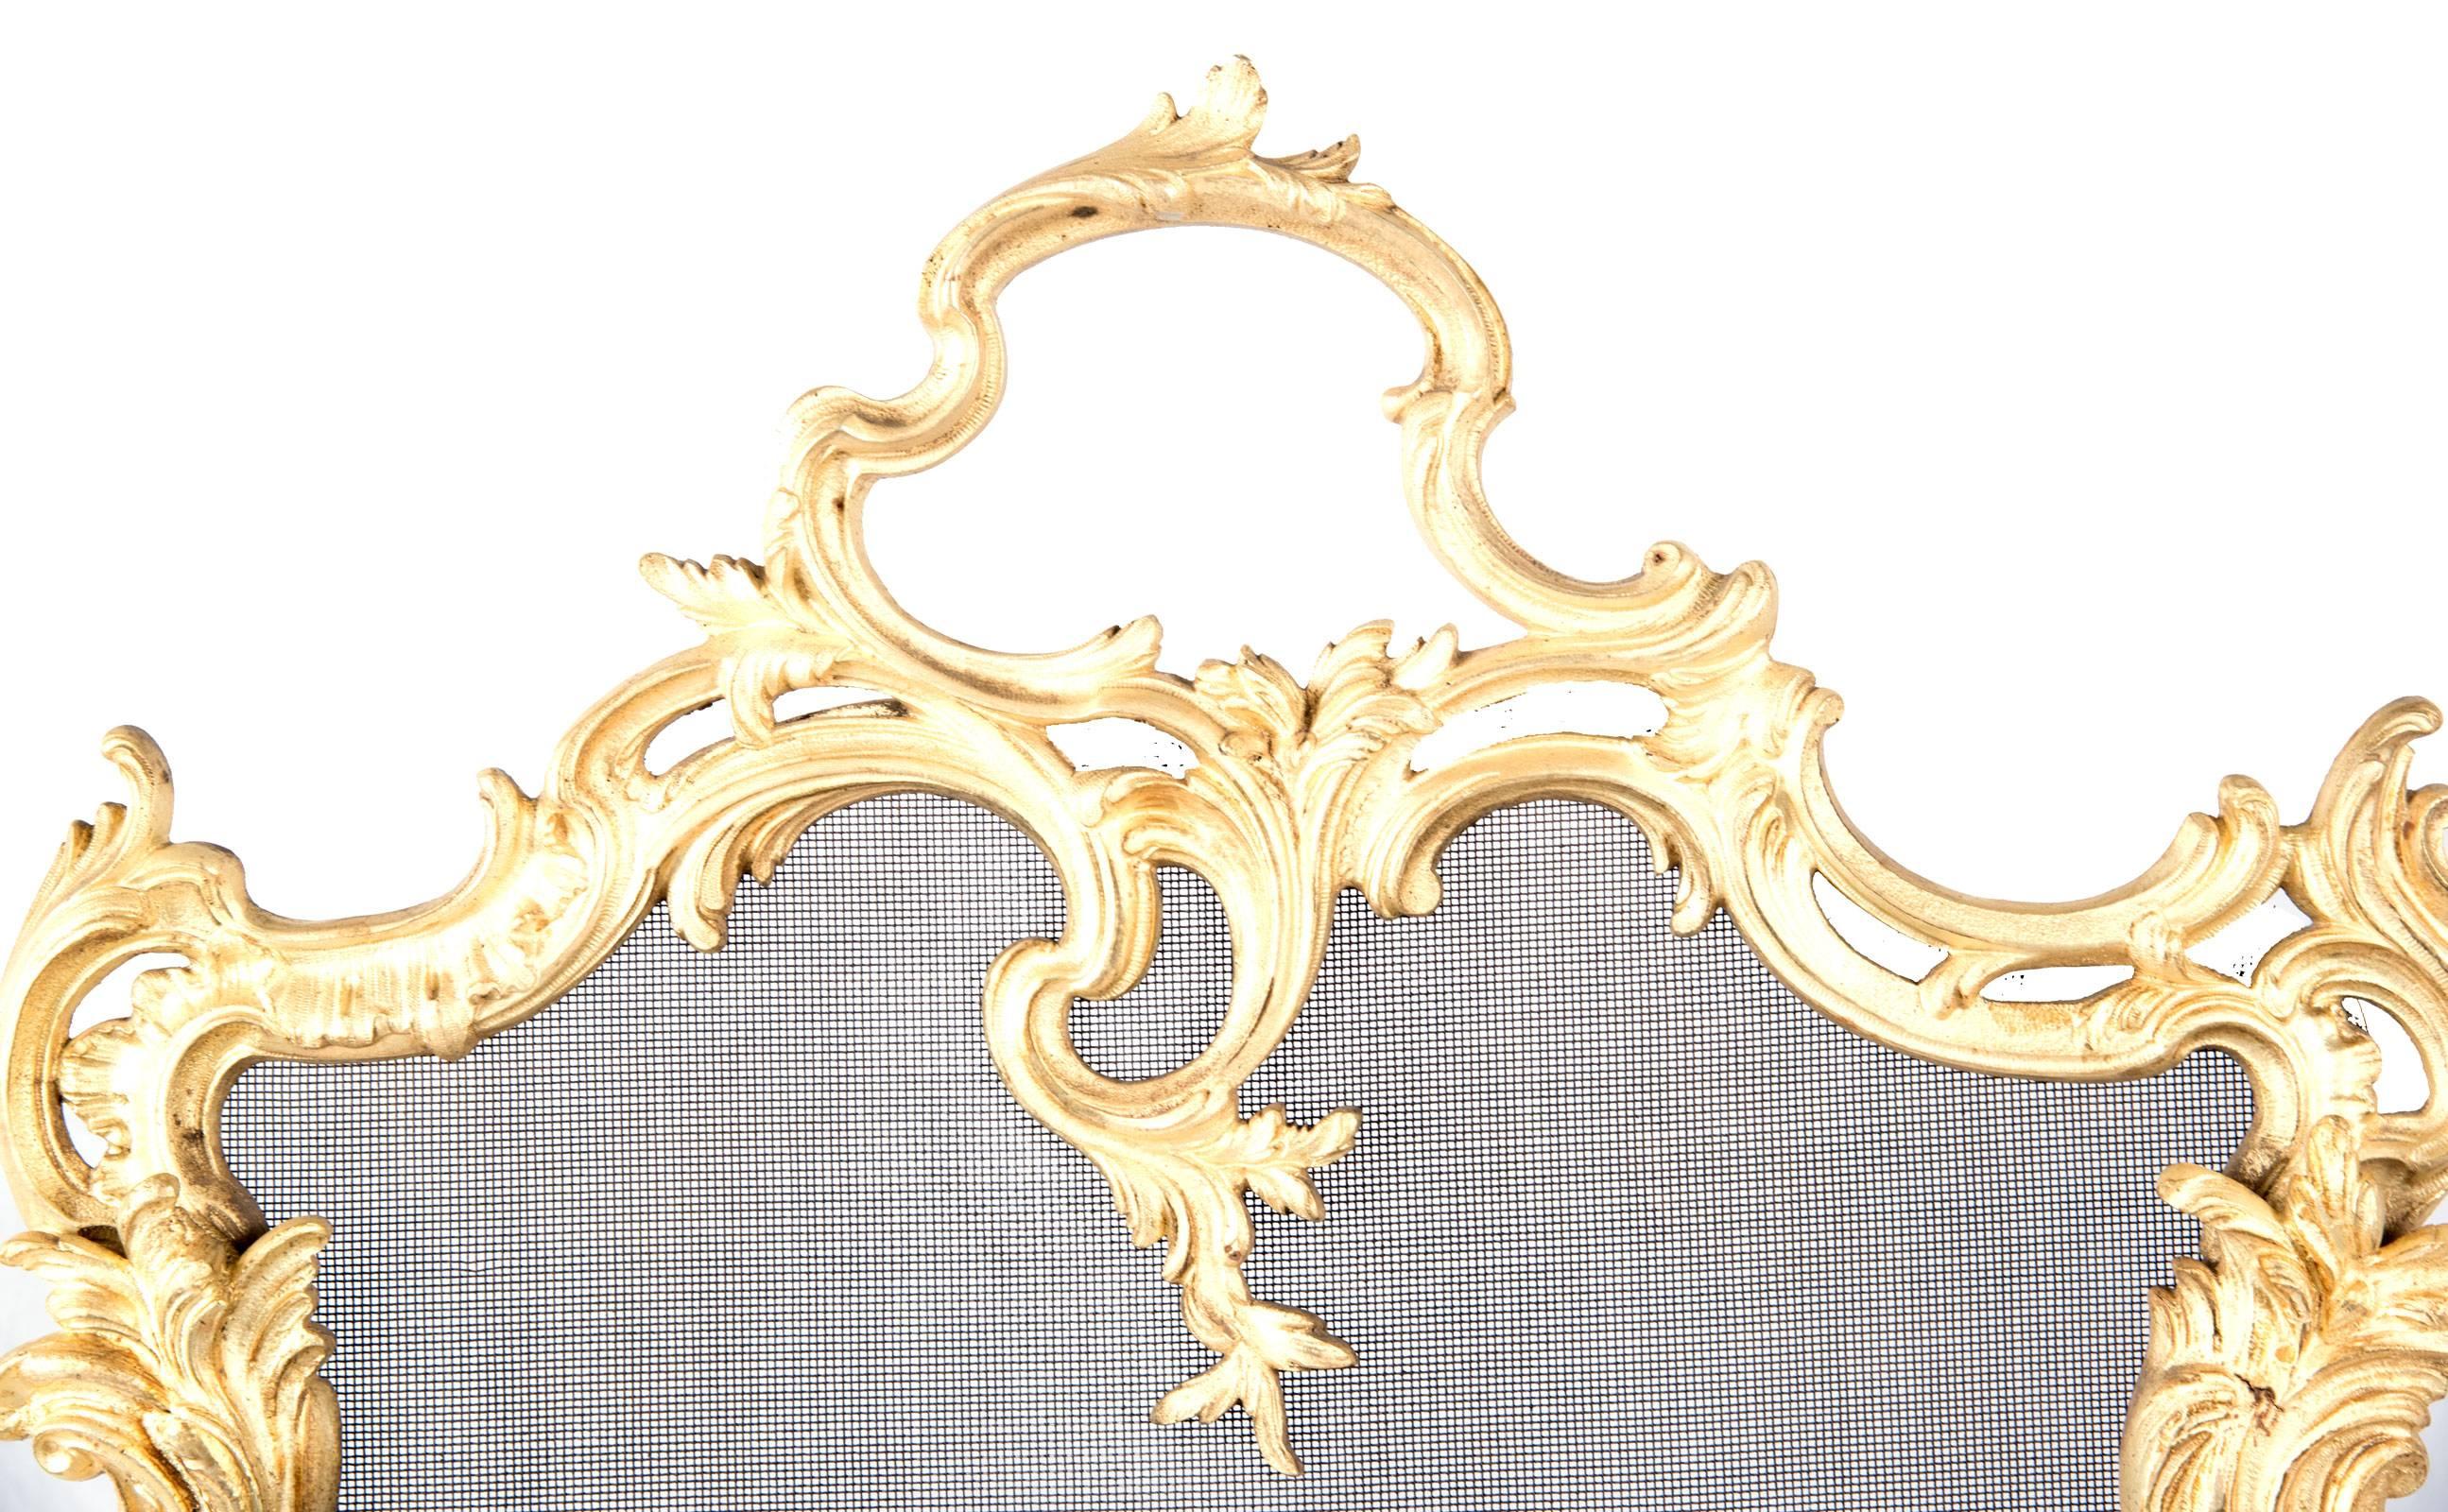 French 19th Century Gilt-Brass Rococo-Style Fireplace Screen